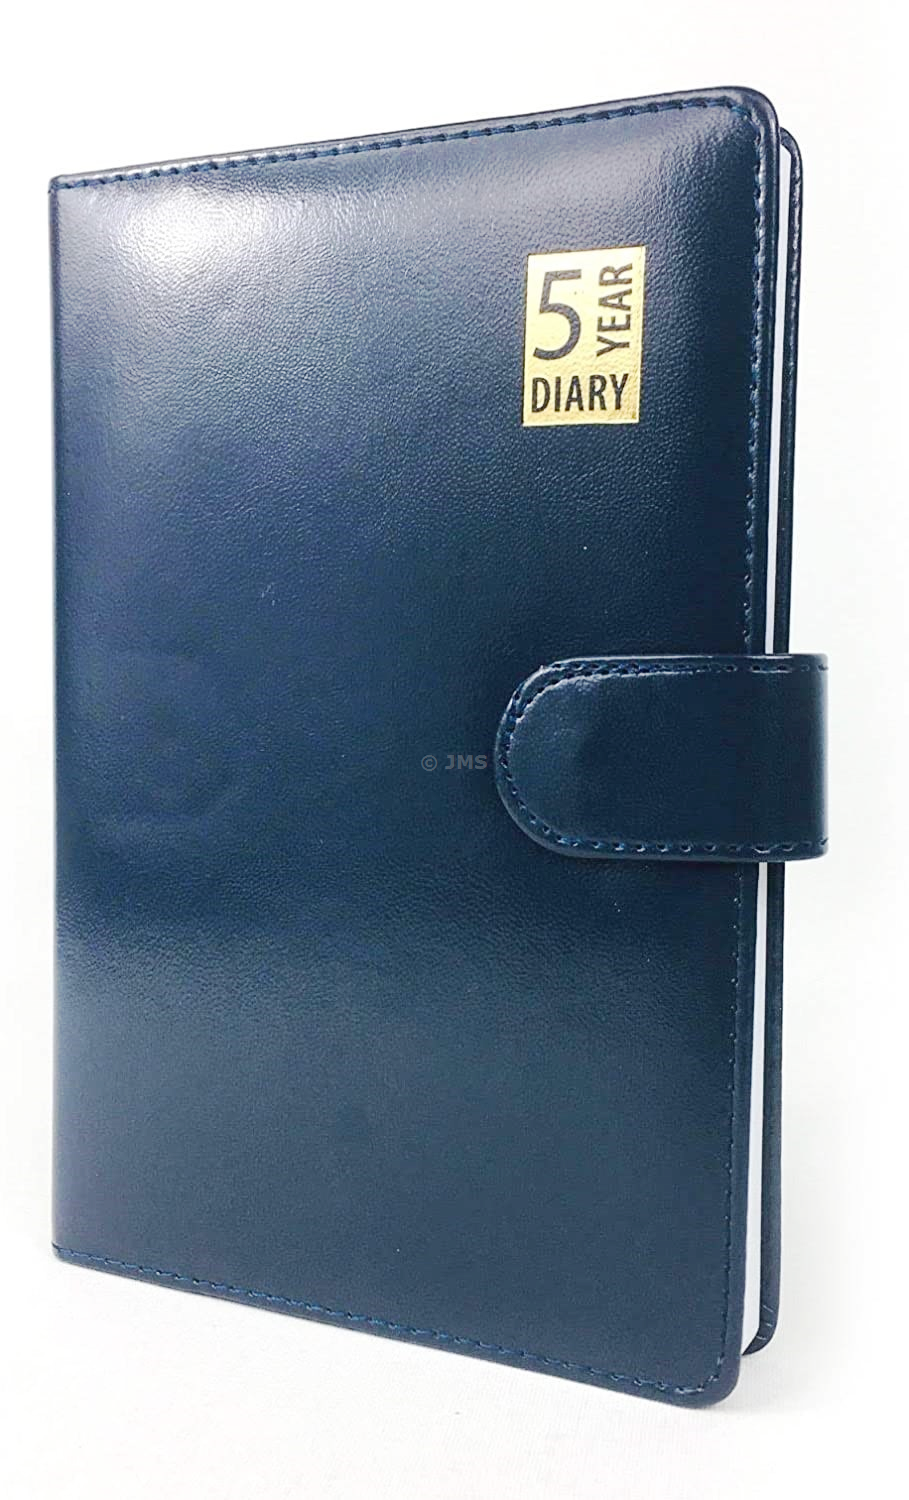 A5 Size 5 Years Undated Diary Leather Bound with Magnetic Lock - Blue